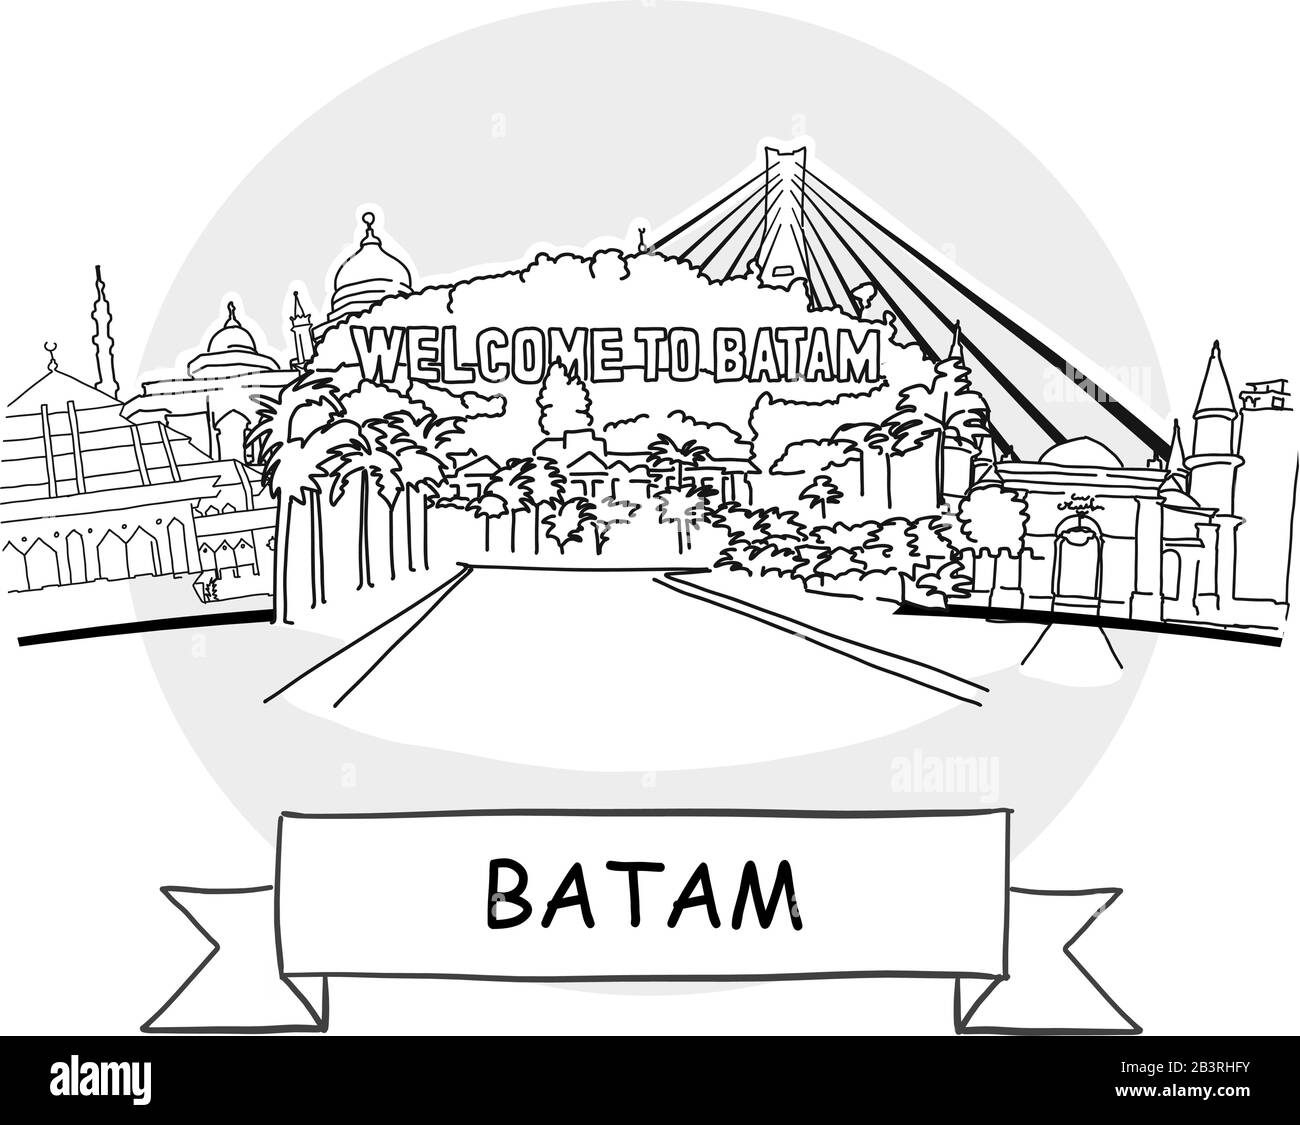 Batam Hand-Drawn Urban Vector Sign. Black Line Art Illustration with Ribbon and Title. Stock Vector